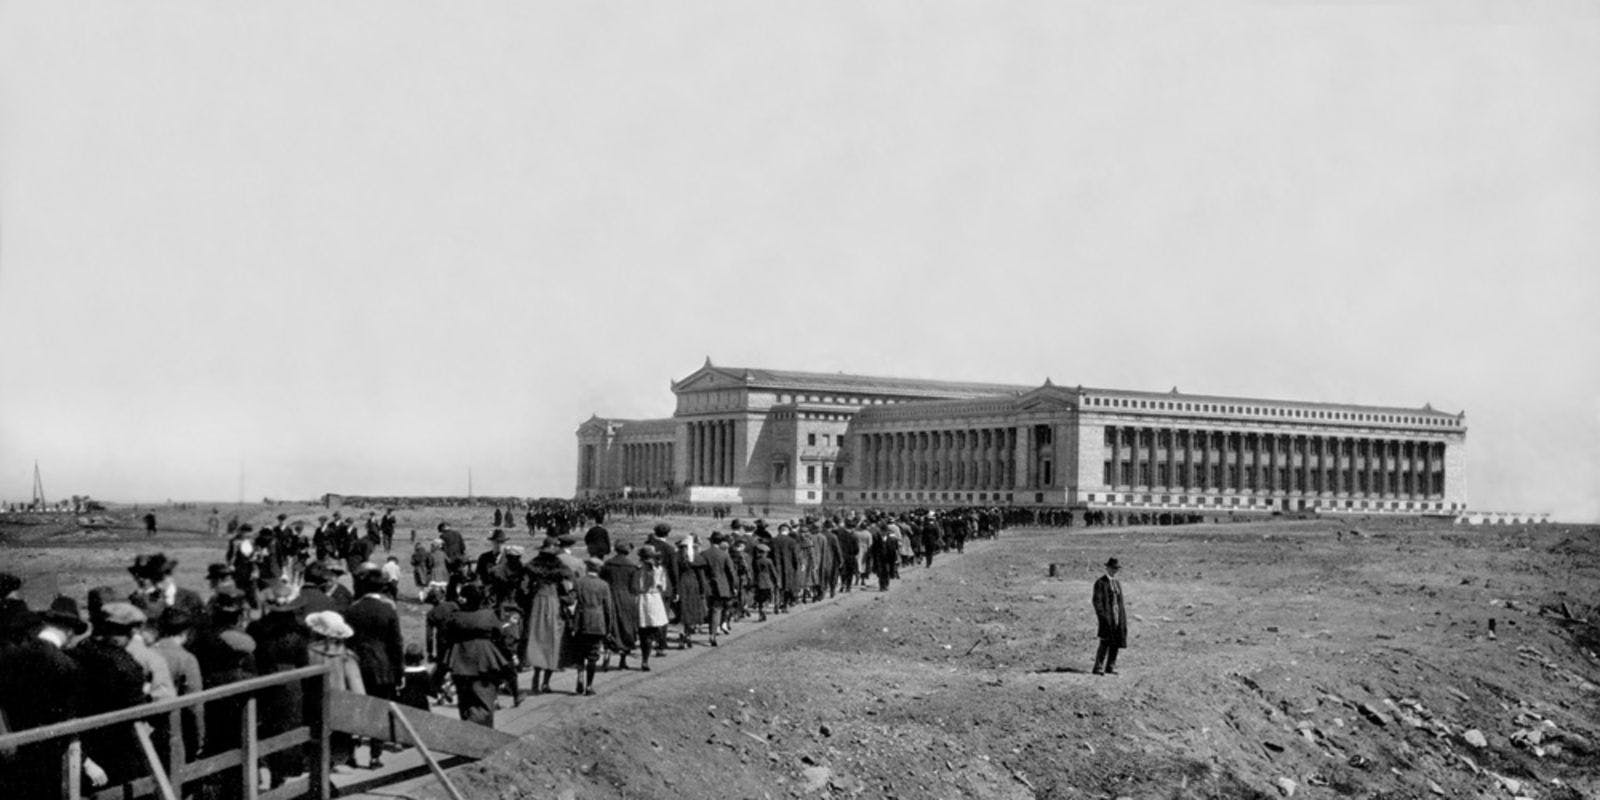 Opening Day of The Field Museum, May 5 1921. Crowds approaching the Museum with a lone man standing to the side of the crowd. People crossing a wooden bridge, with the entire exterior view of the north facade of the Museum in the background.